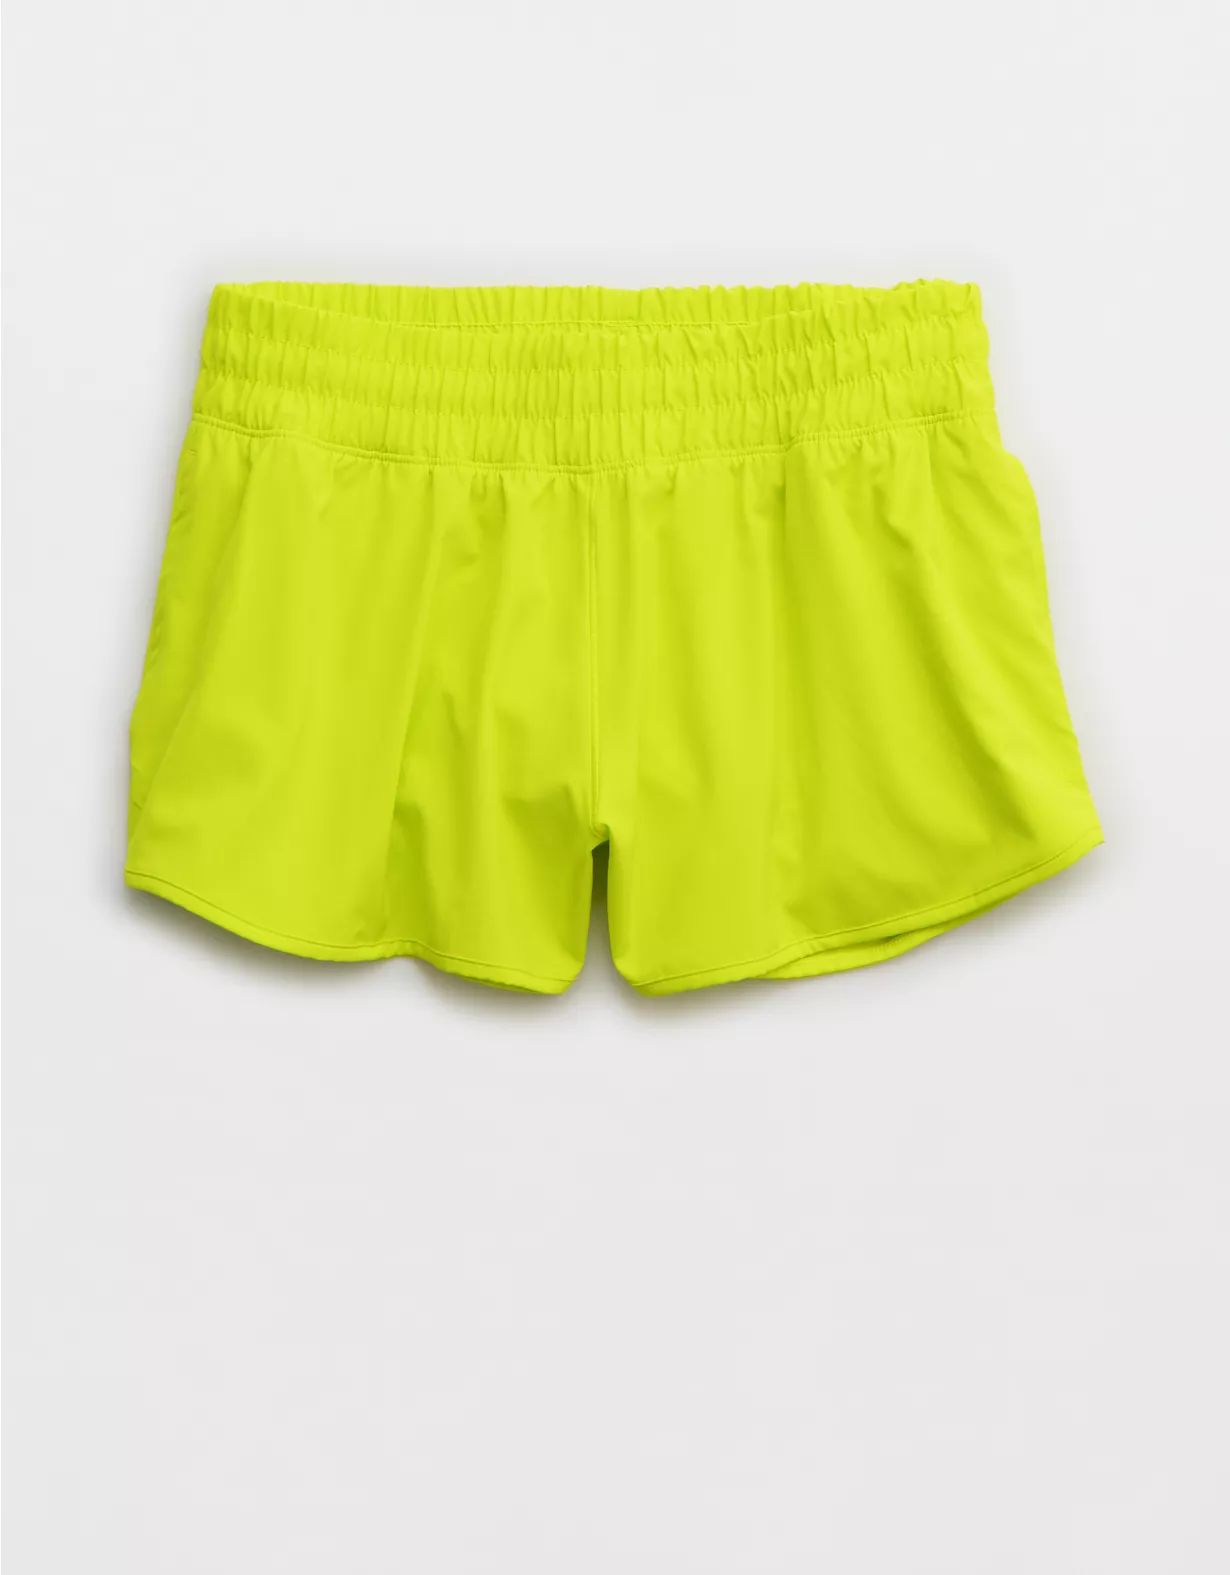 OFFLINE By Aerie Hot Stuff Low Rise Short | Aerie